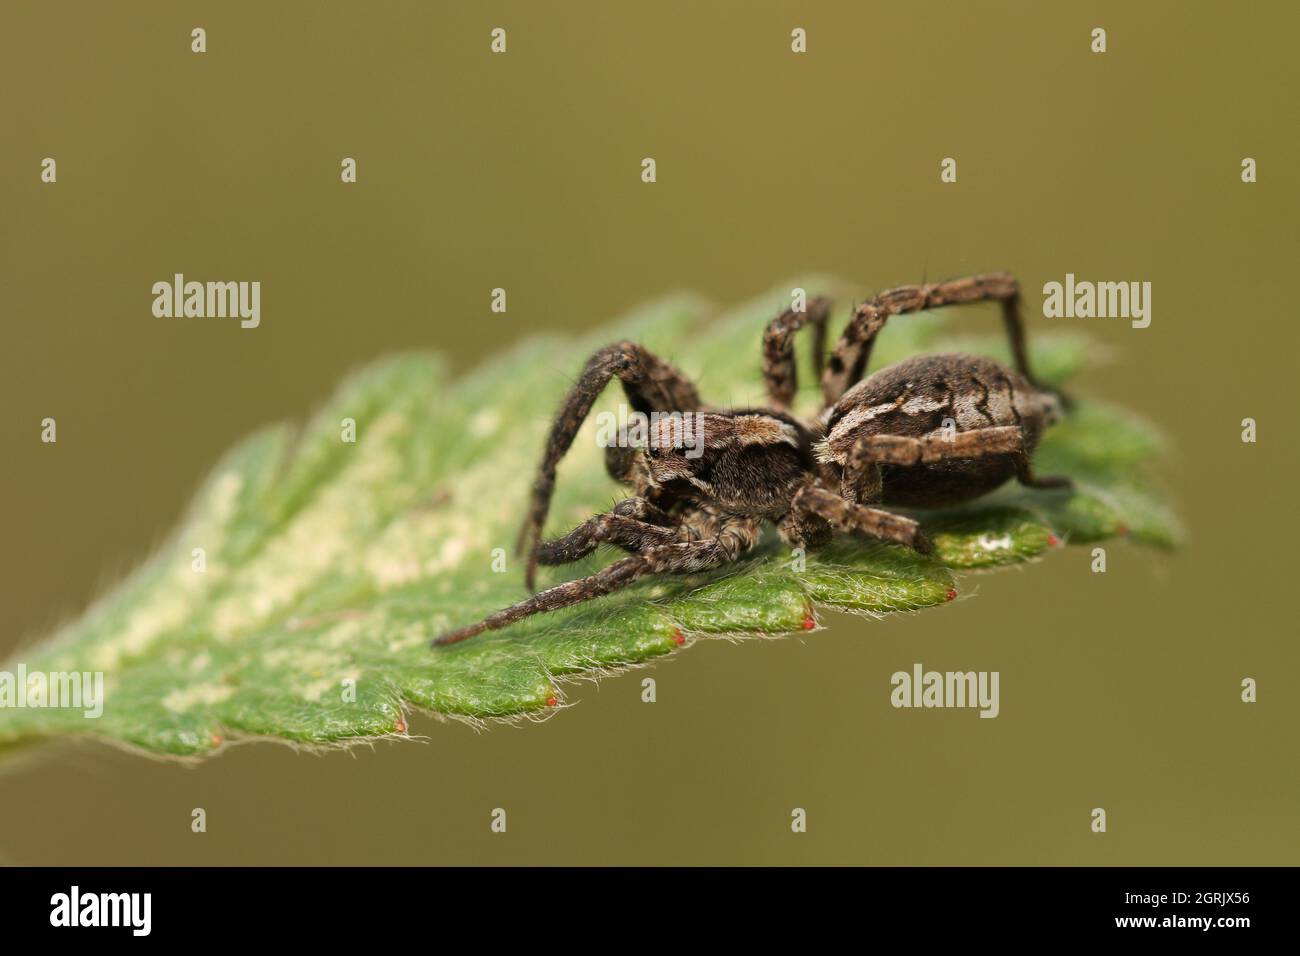 A hunting Wolf Spider, Alopecosa accentuata, also known as Easter Fox Spider, on a leaf. Stock Photo